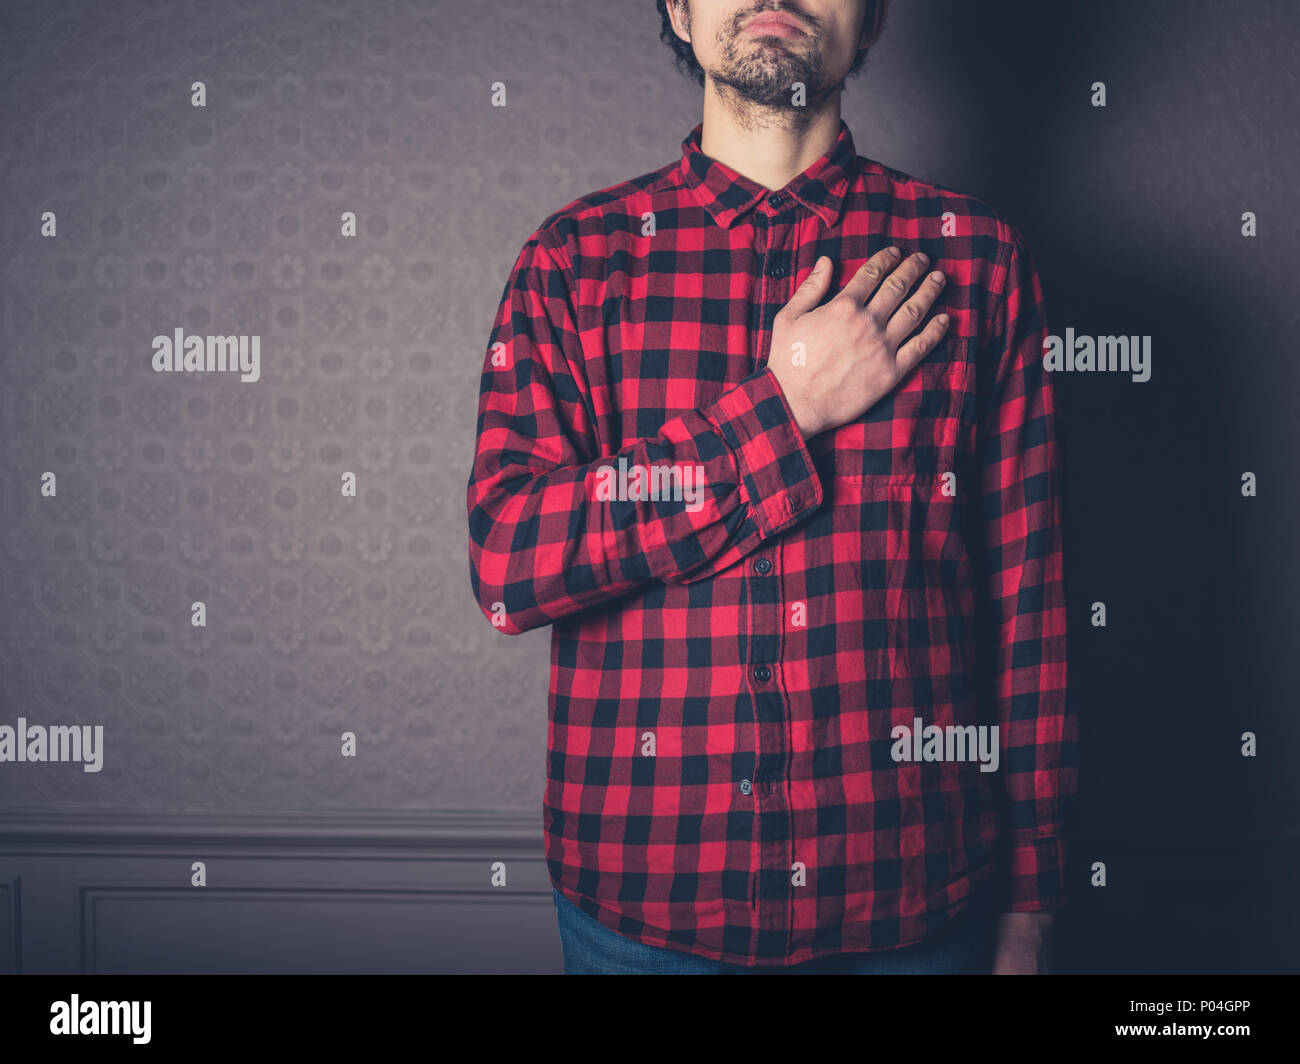 A young man in a red shirt is swearing allegiance Stock Photo